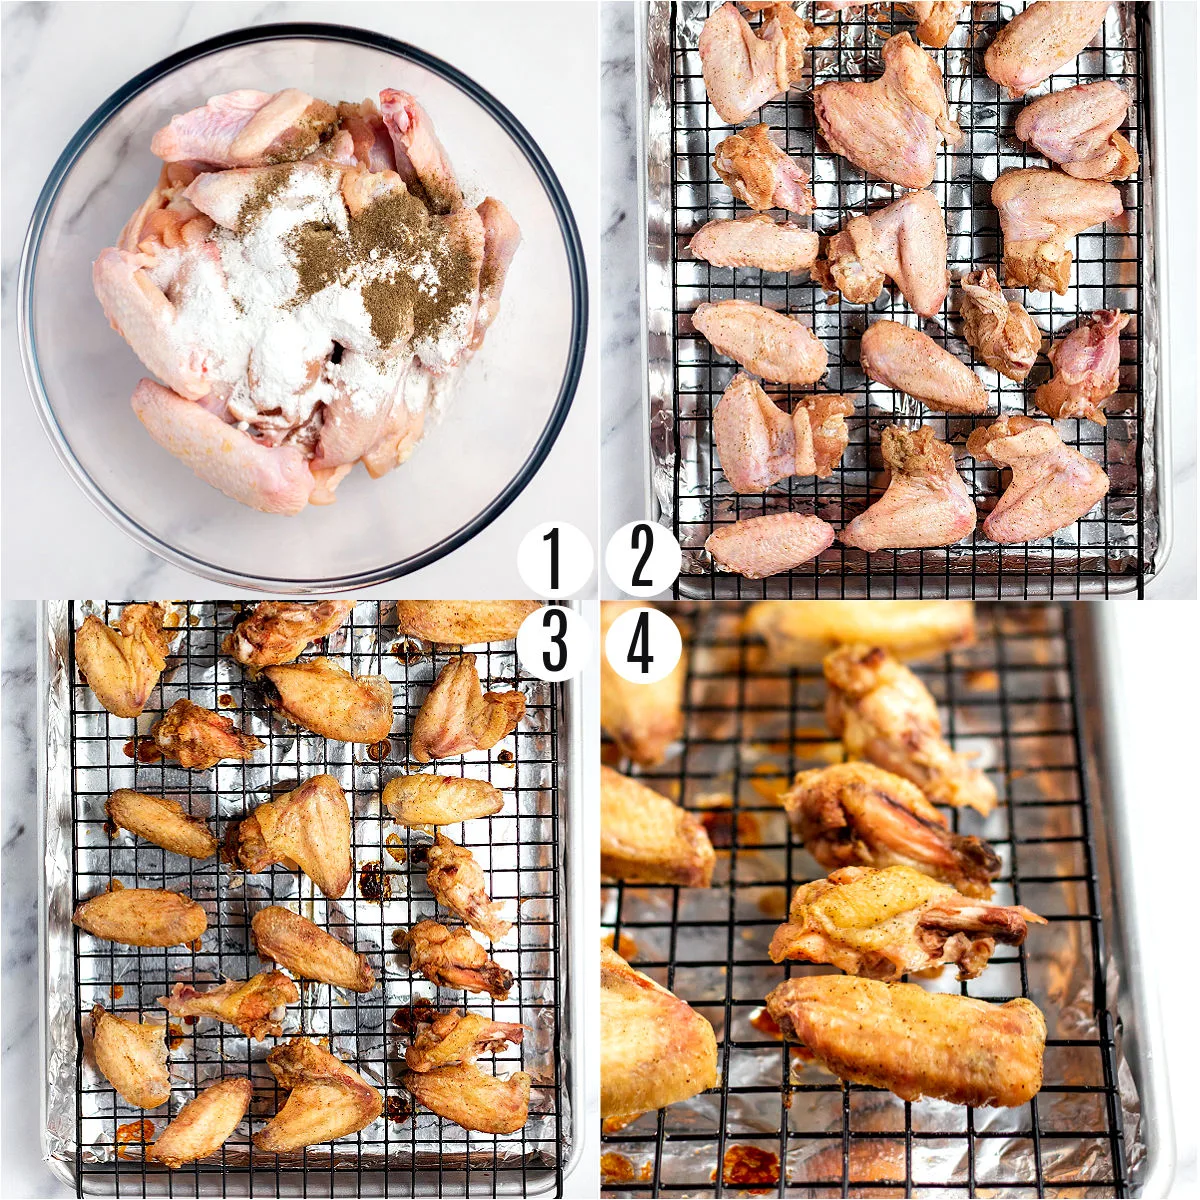 Step by step photos showing how to bake chicken wings.